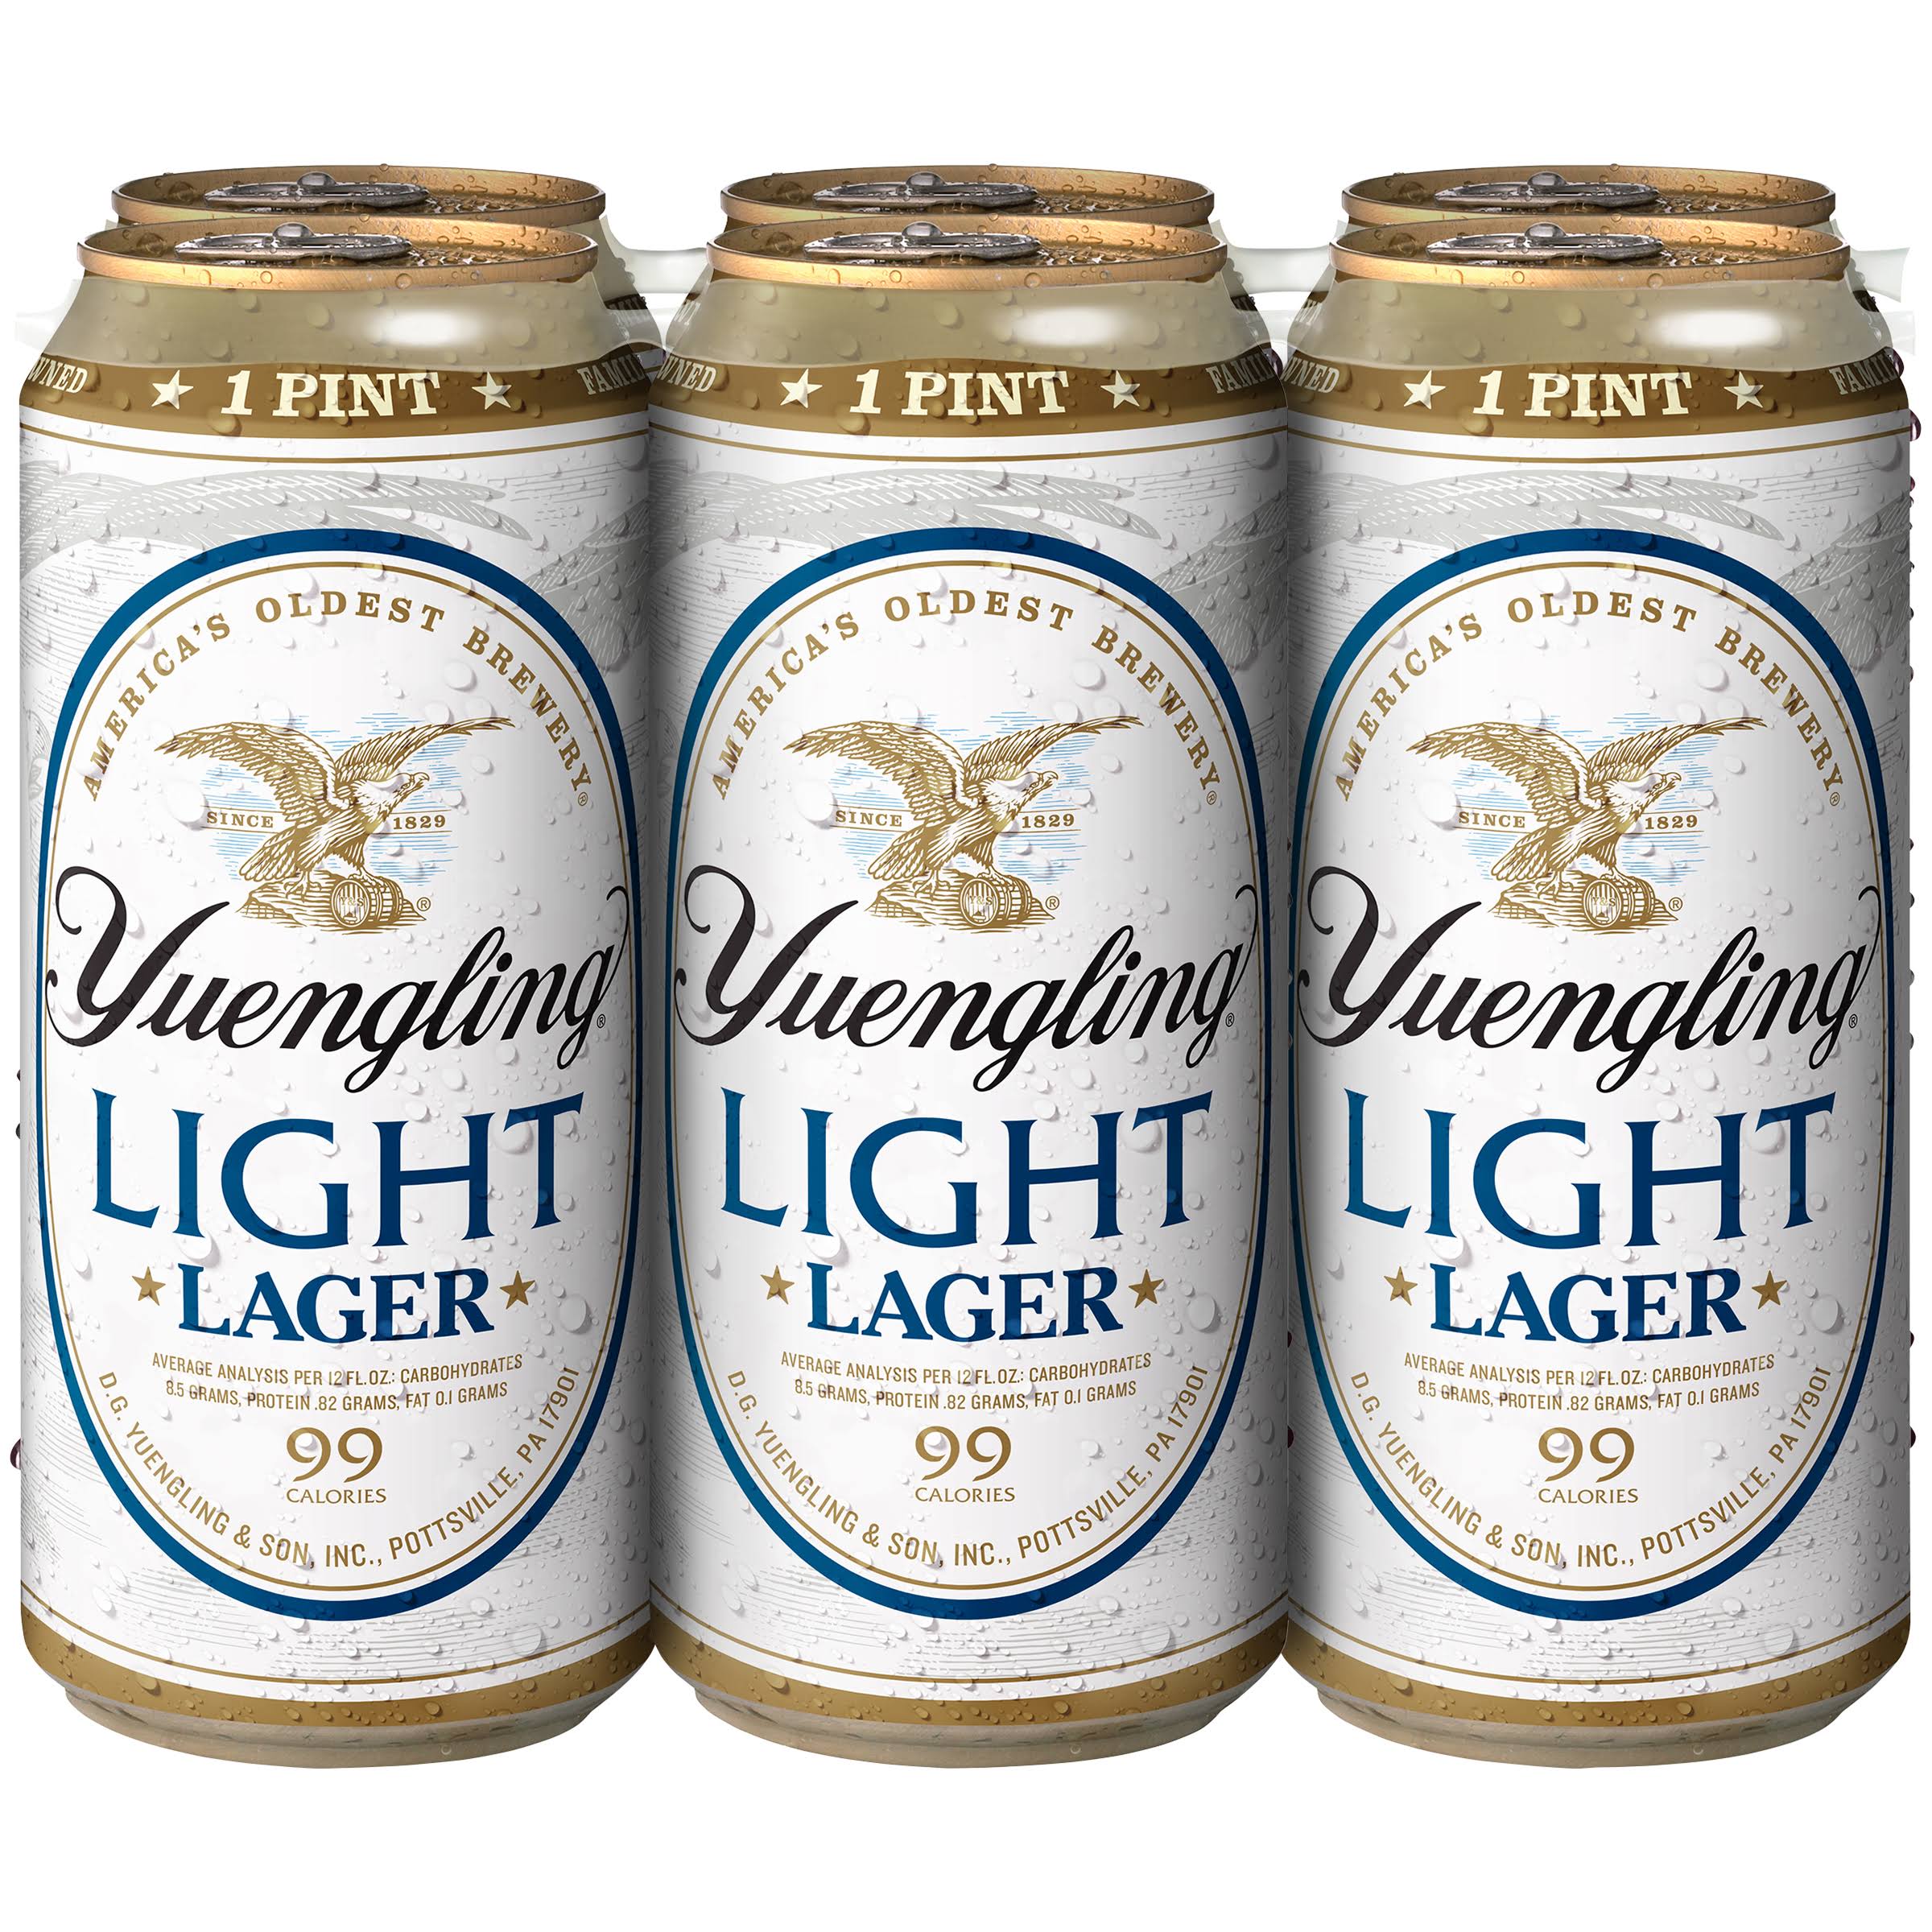 Yuengling Beer, Light Lager - 6 pack, 16 fl oz cans